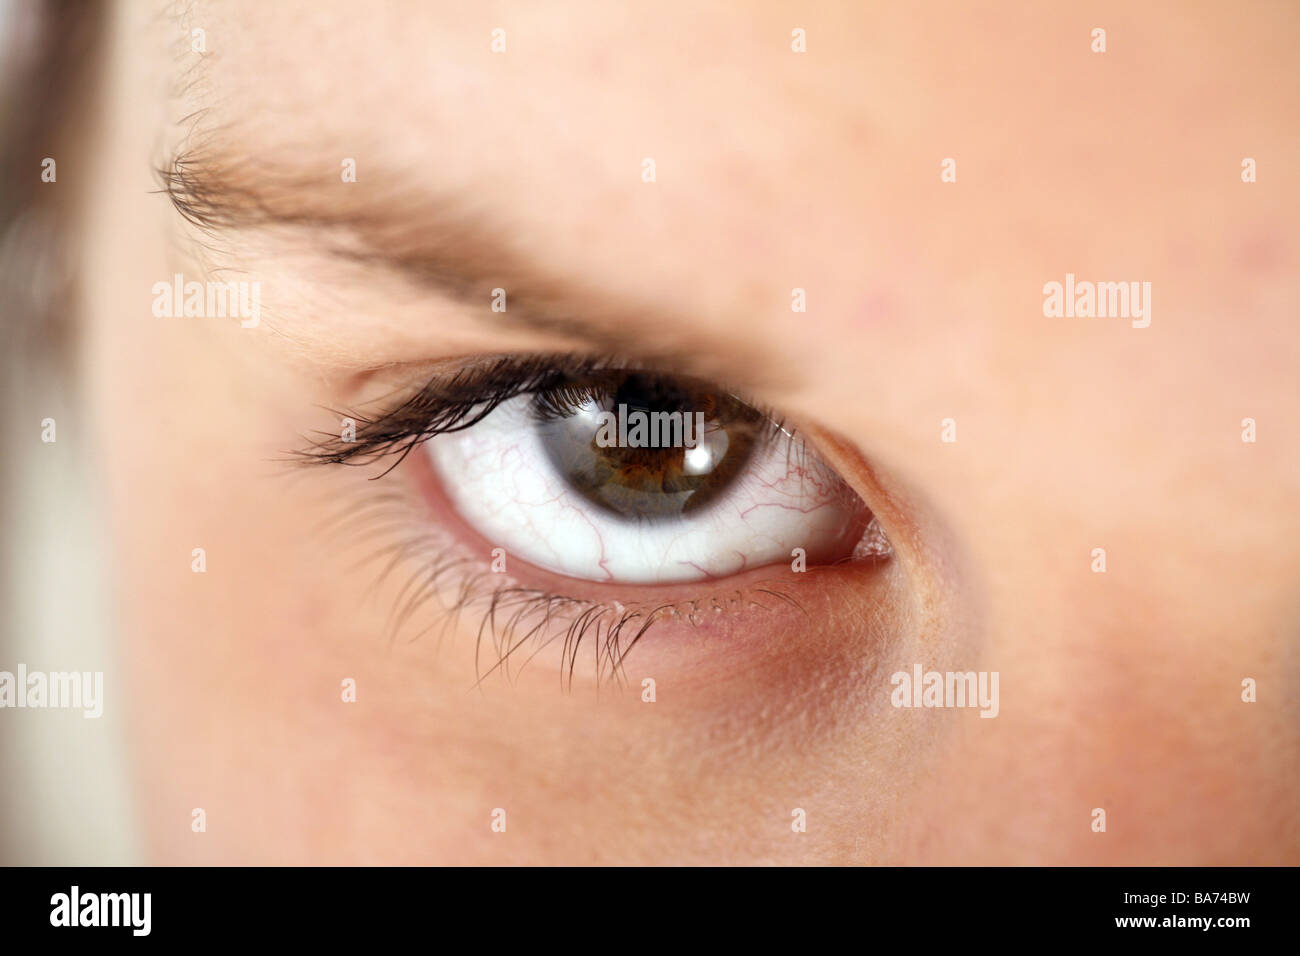 Woman young face detail eye Stock Photo